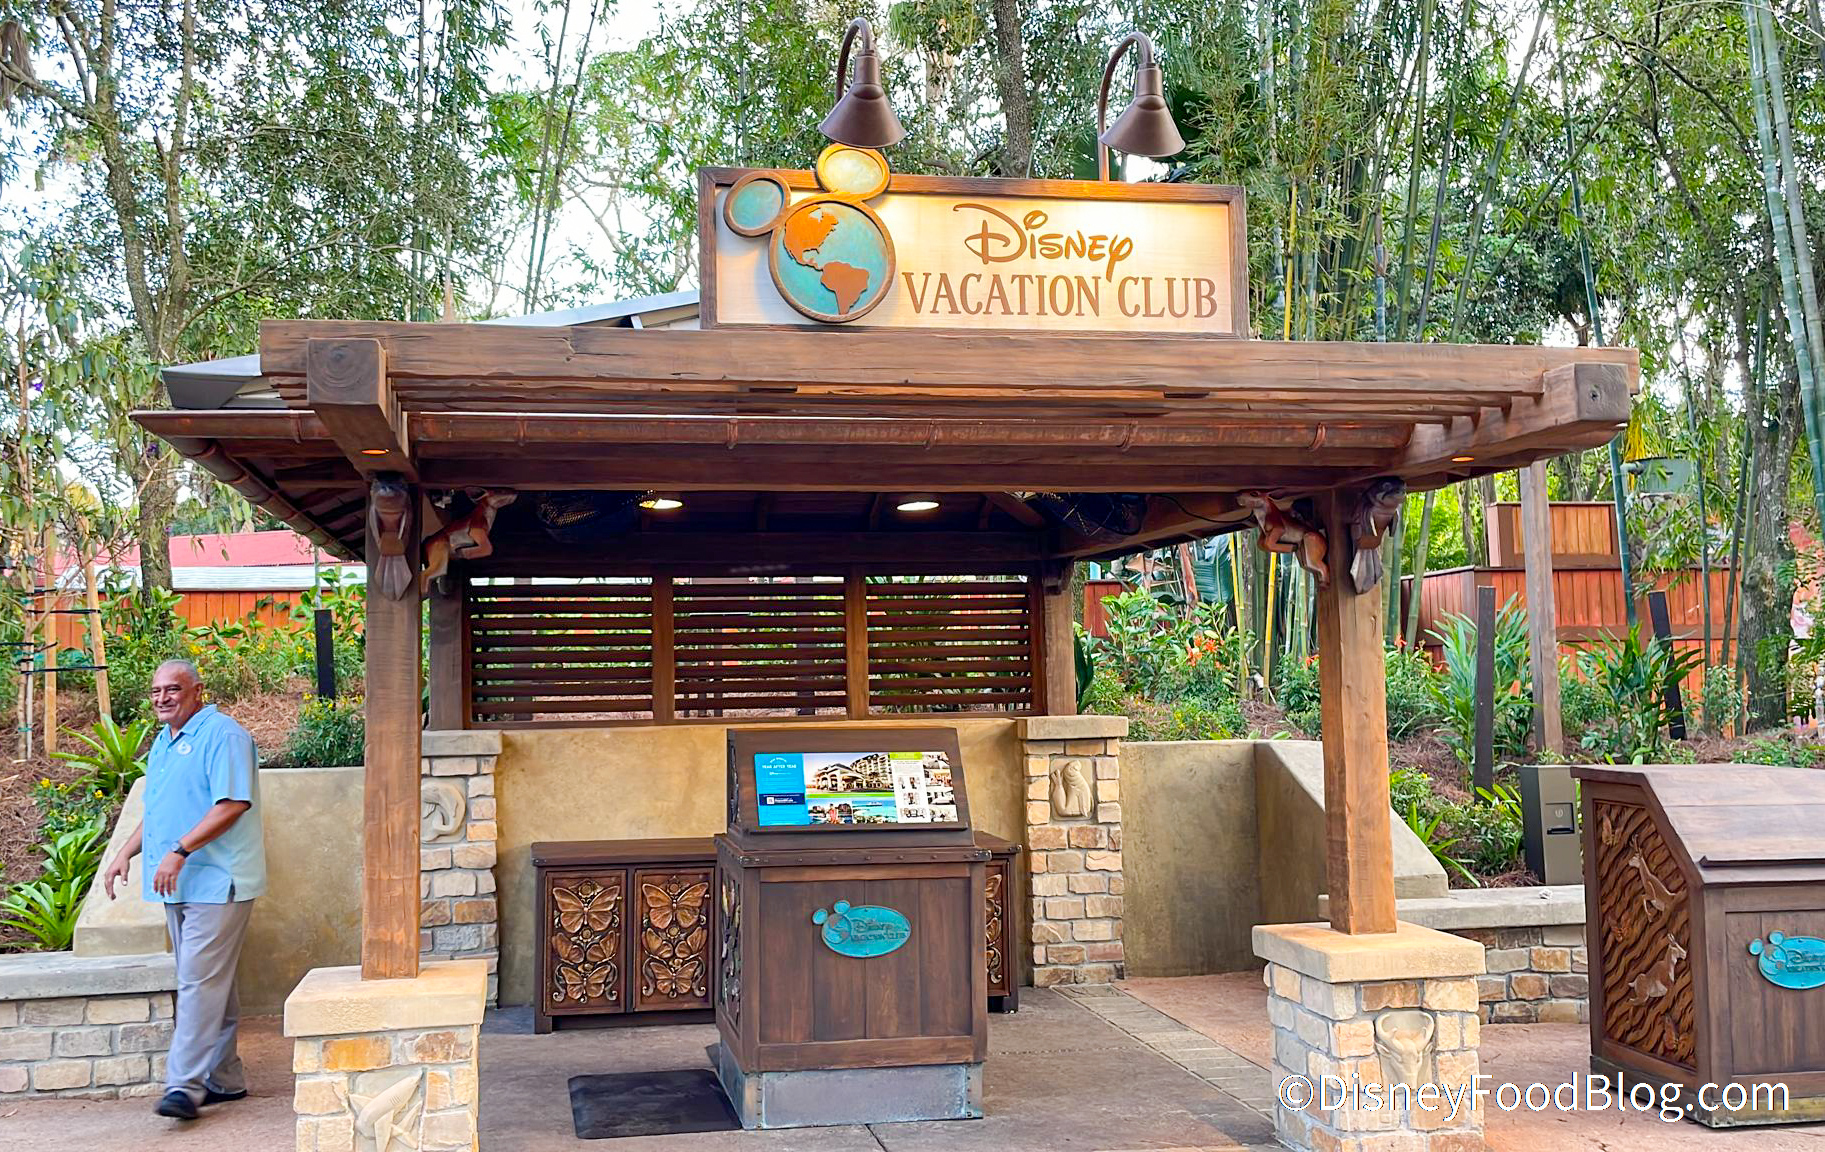 Disney Vacation Club lets fans live in the magic, if only for a while